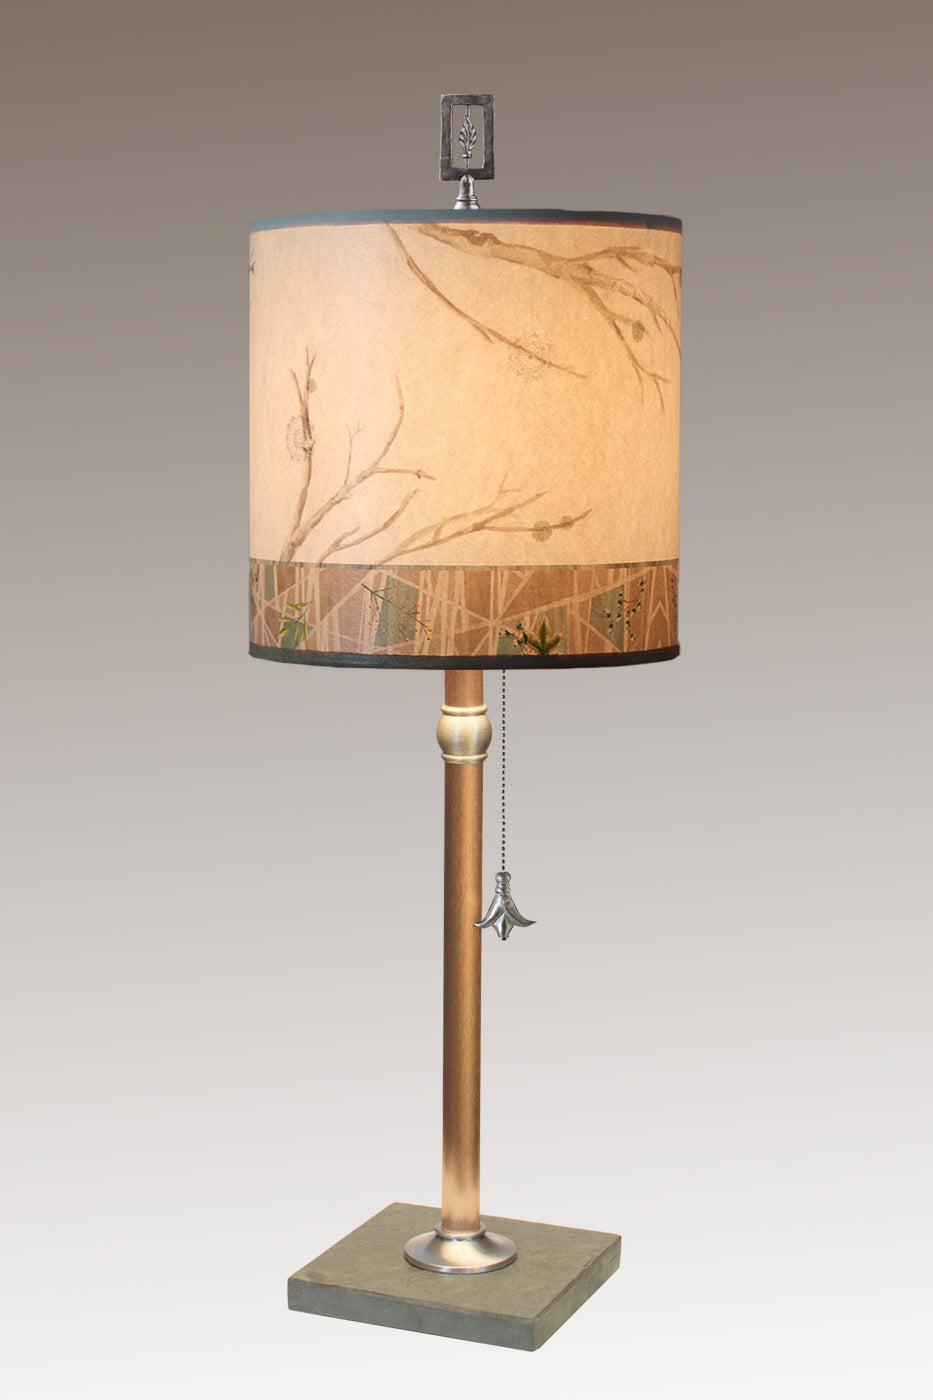 Copper Table Lamp with Medium Drum Shade in Prism Branch